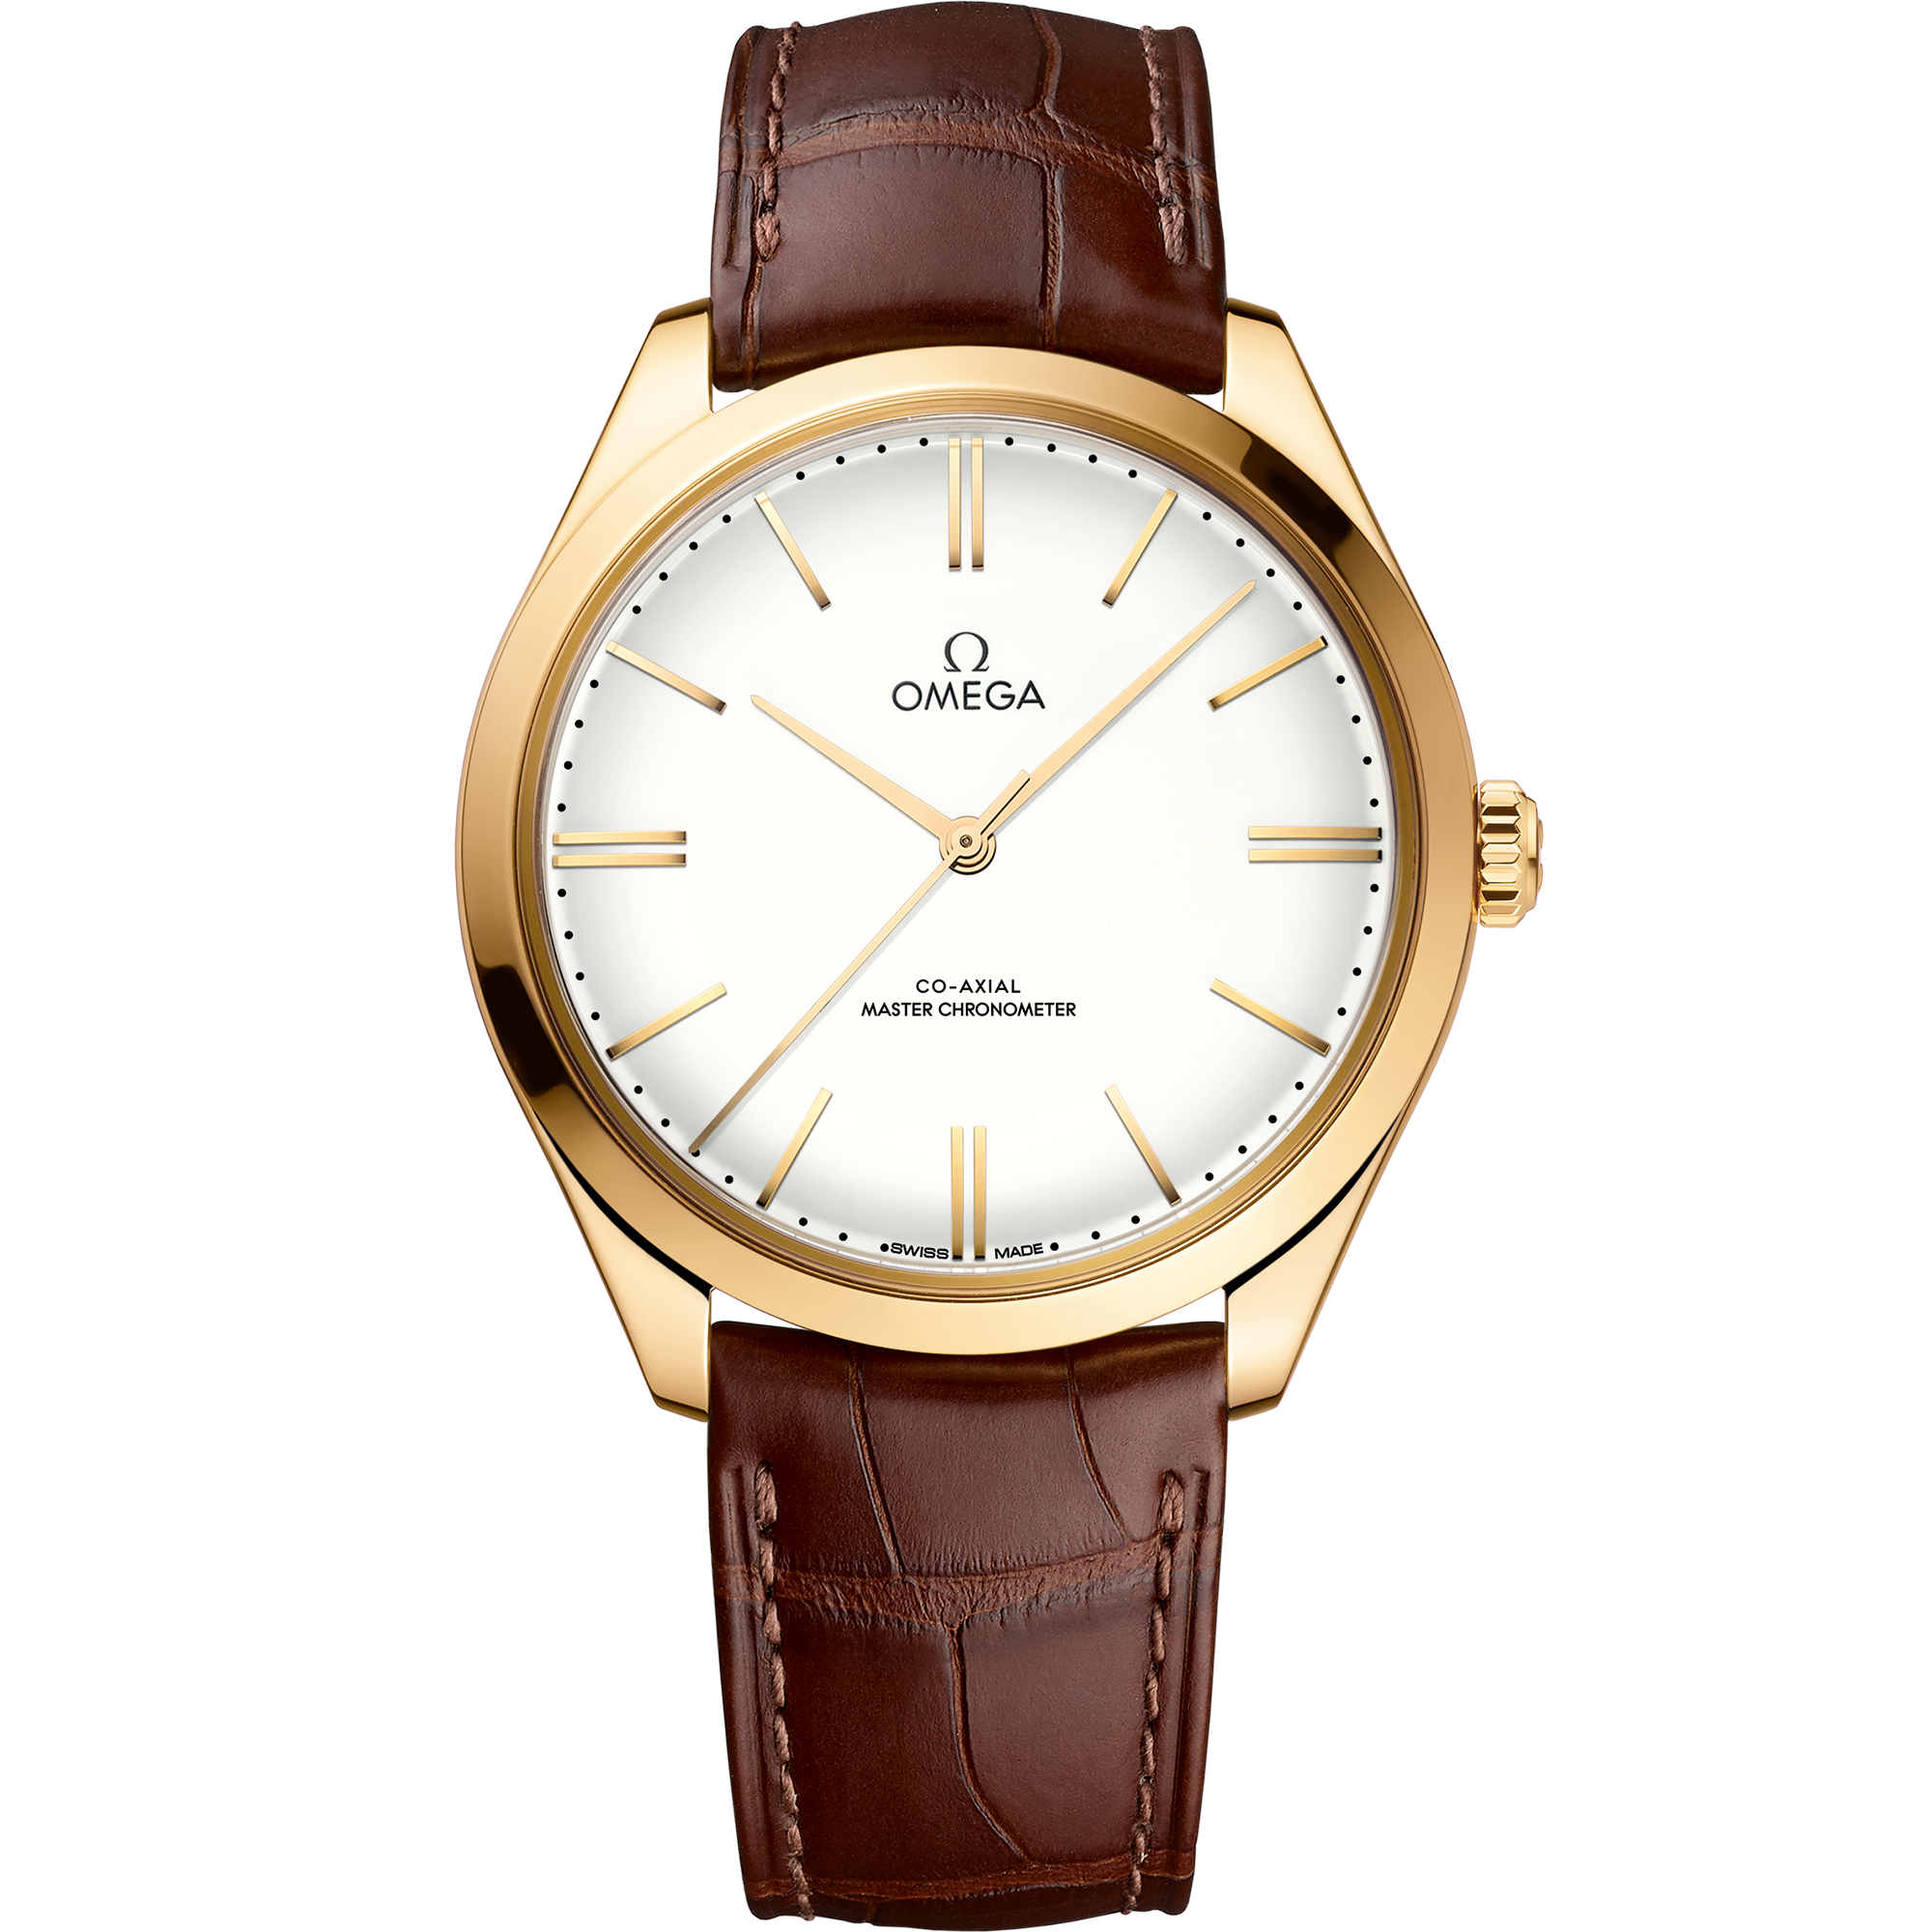 De Ville 40 mm, yellow gold on leather strap - 435.53.40.21.09.001